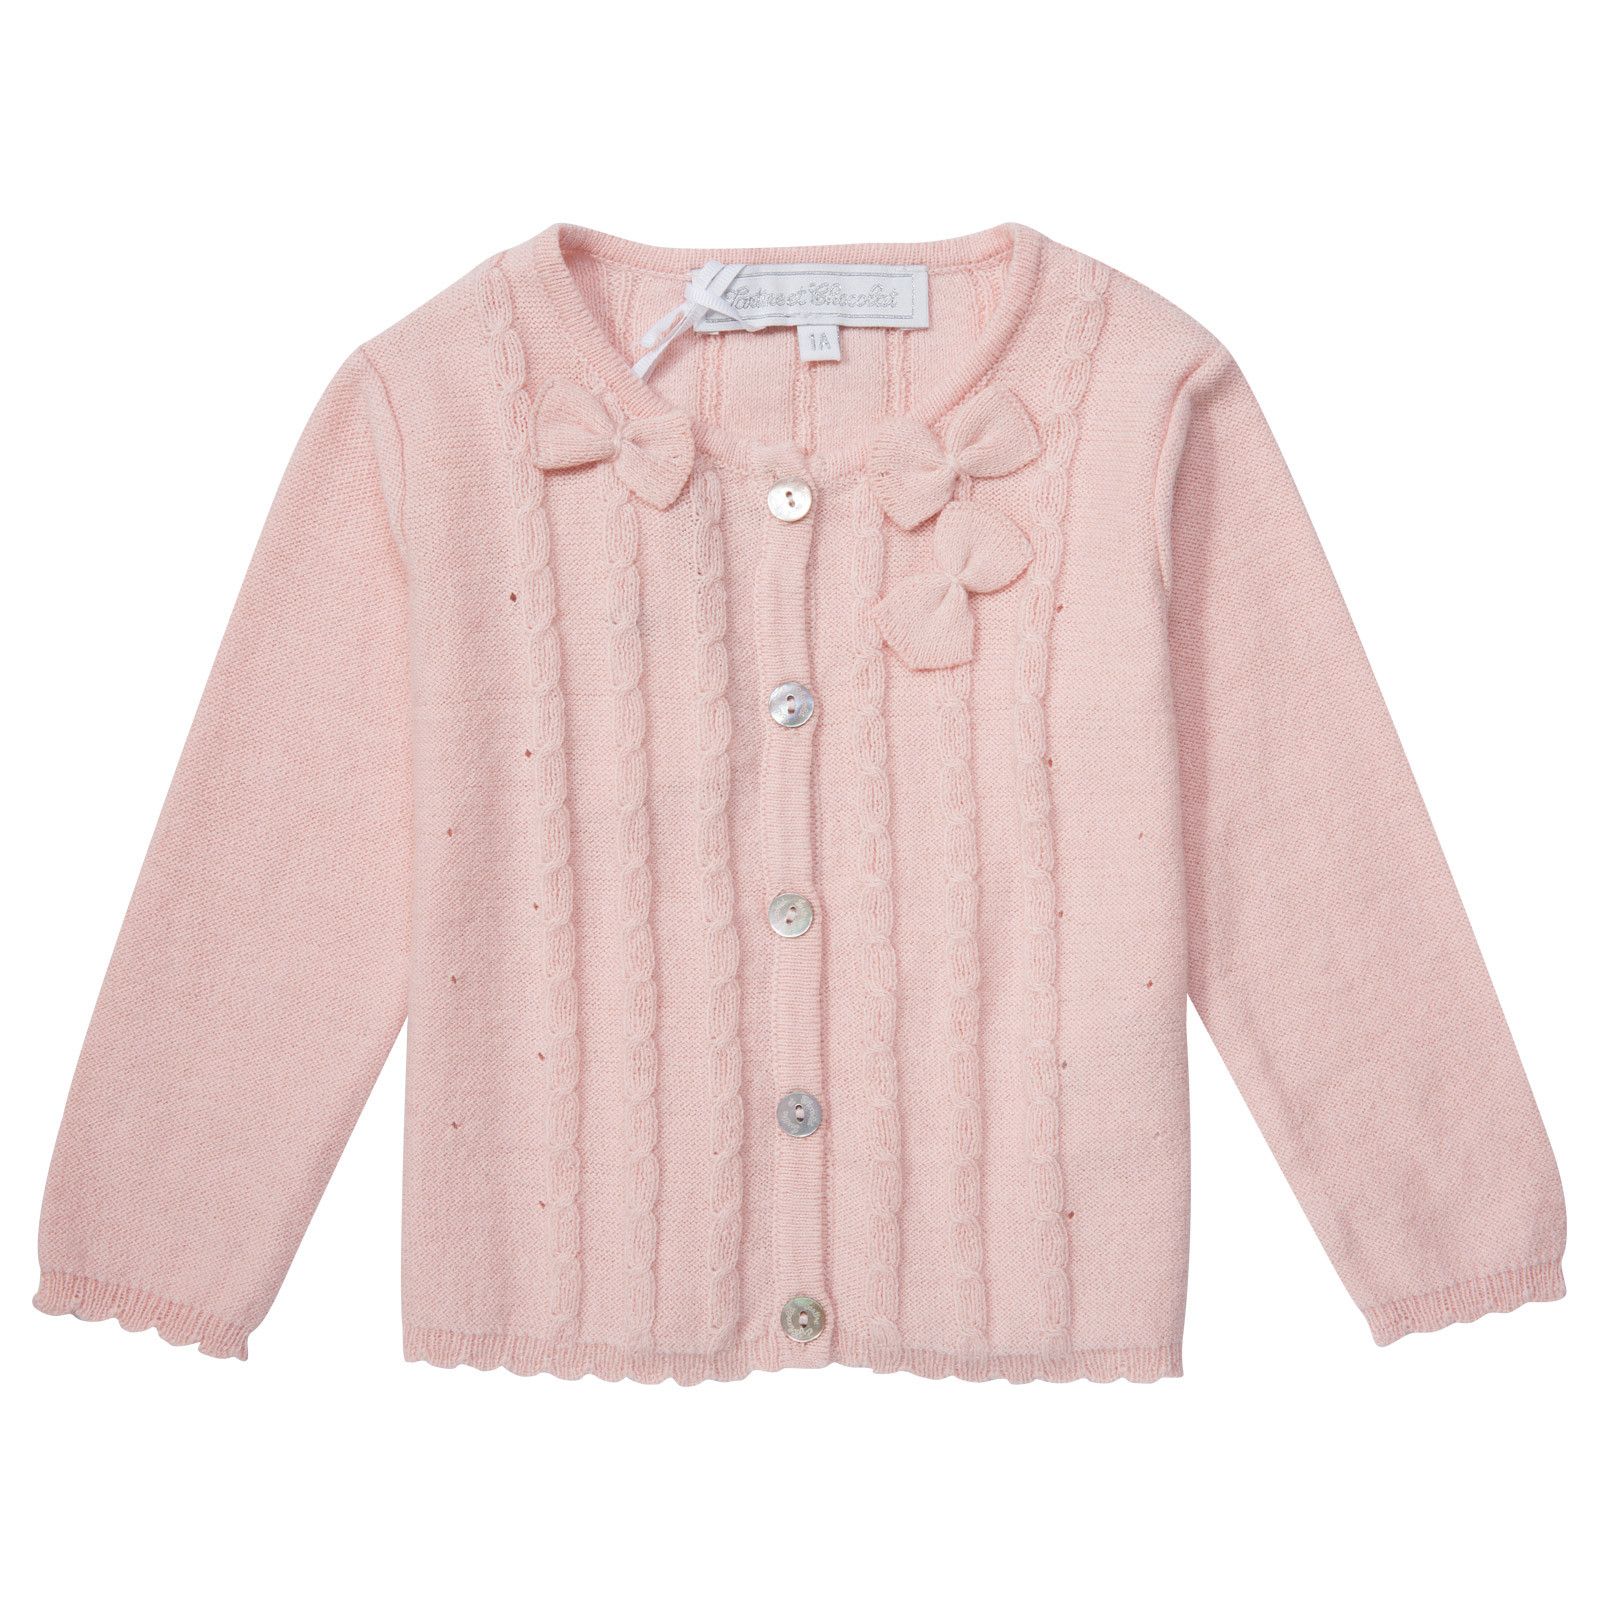 Baby Girls Pink Knitted Cardigan With Bow Trims - CÉMAROSE | Children's Fashion Store - 1